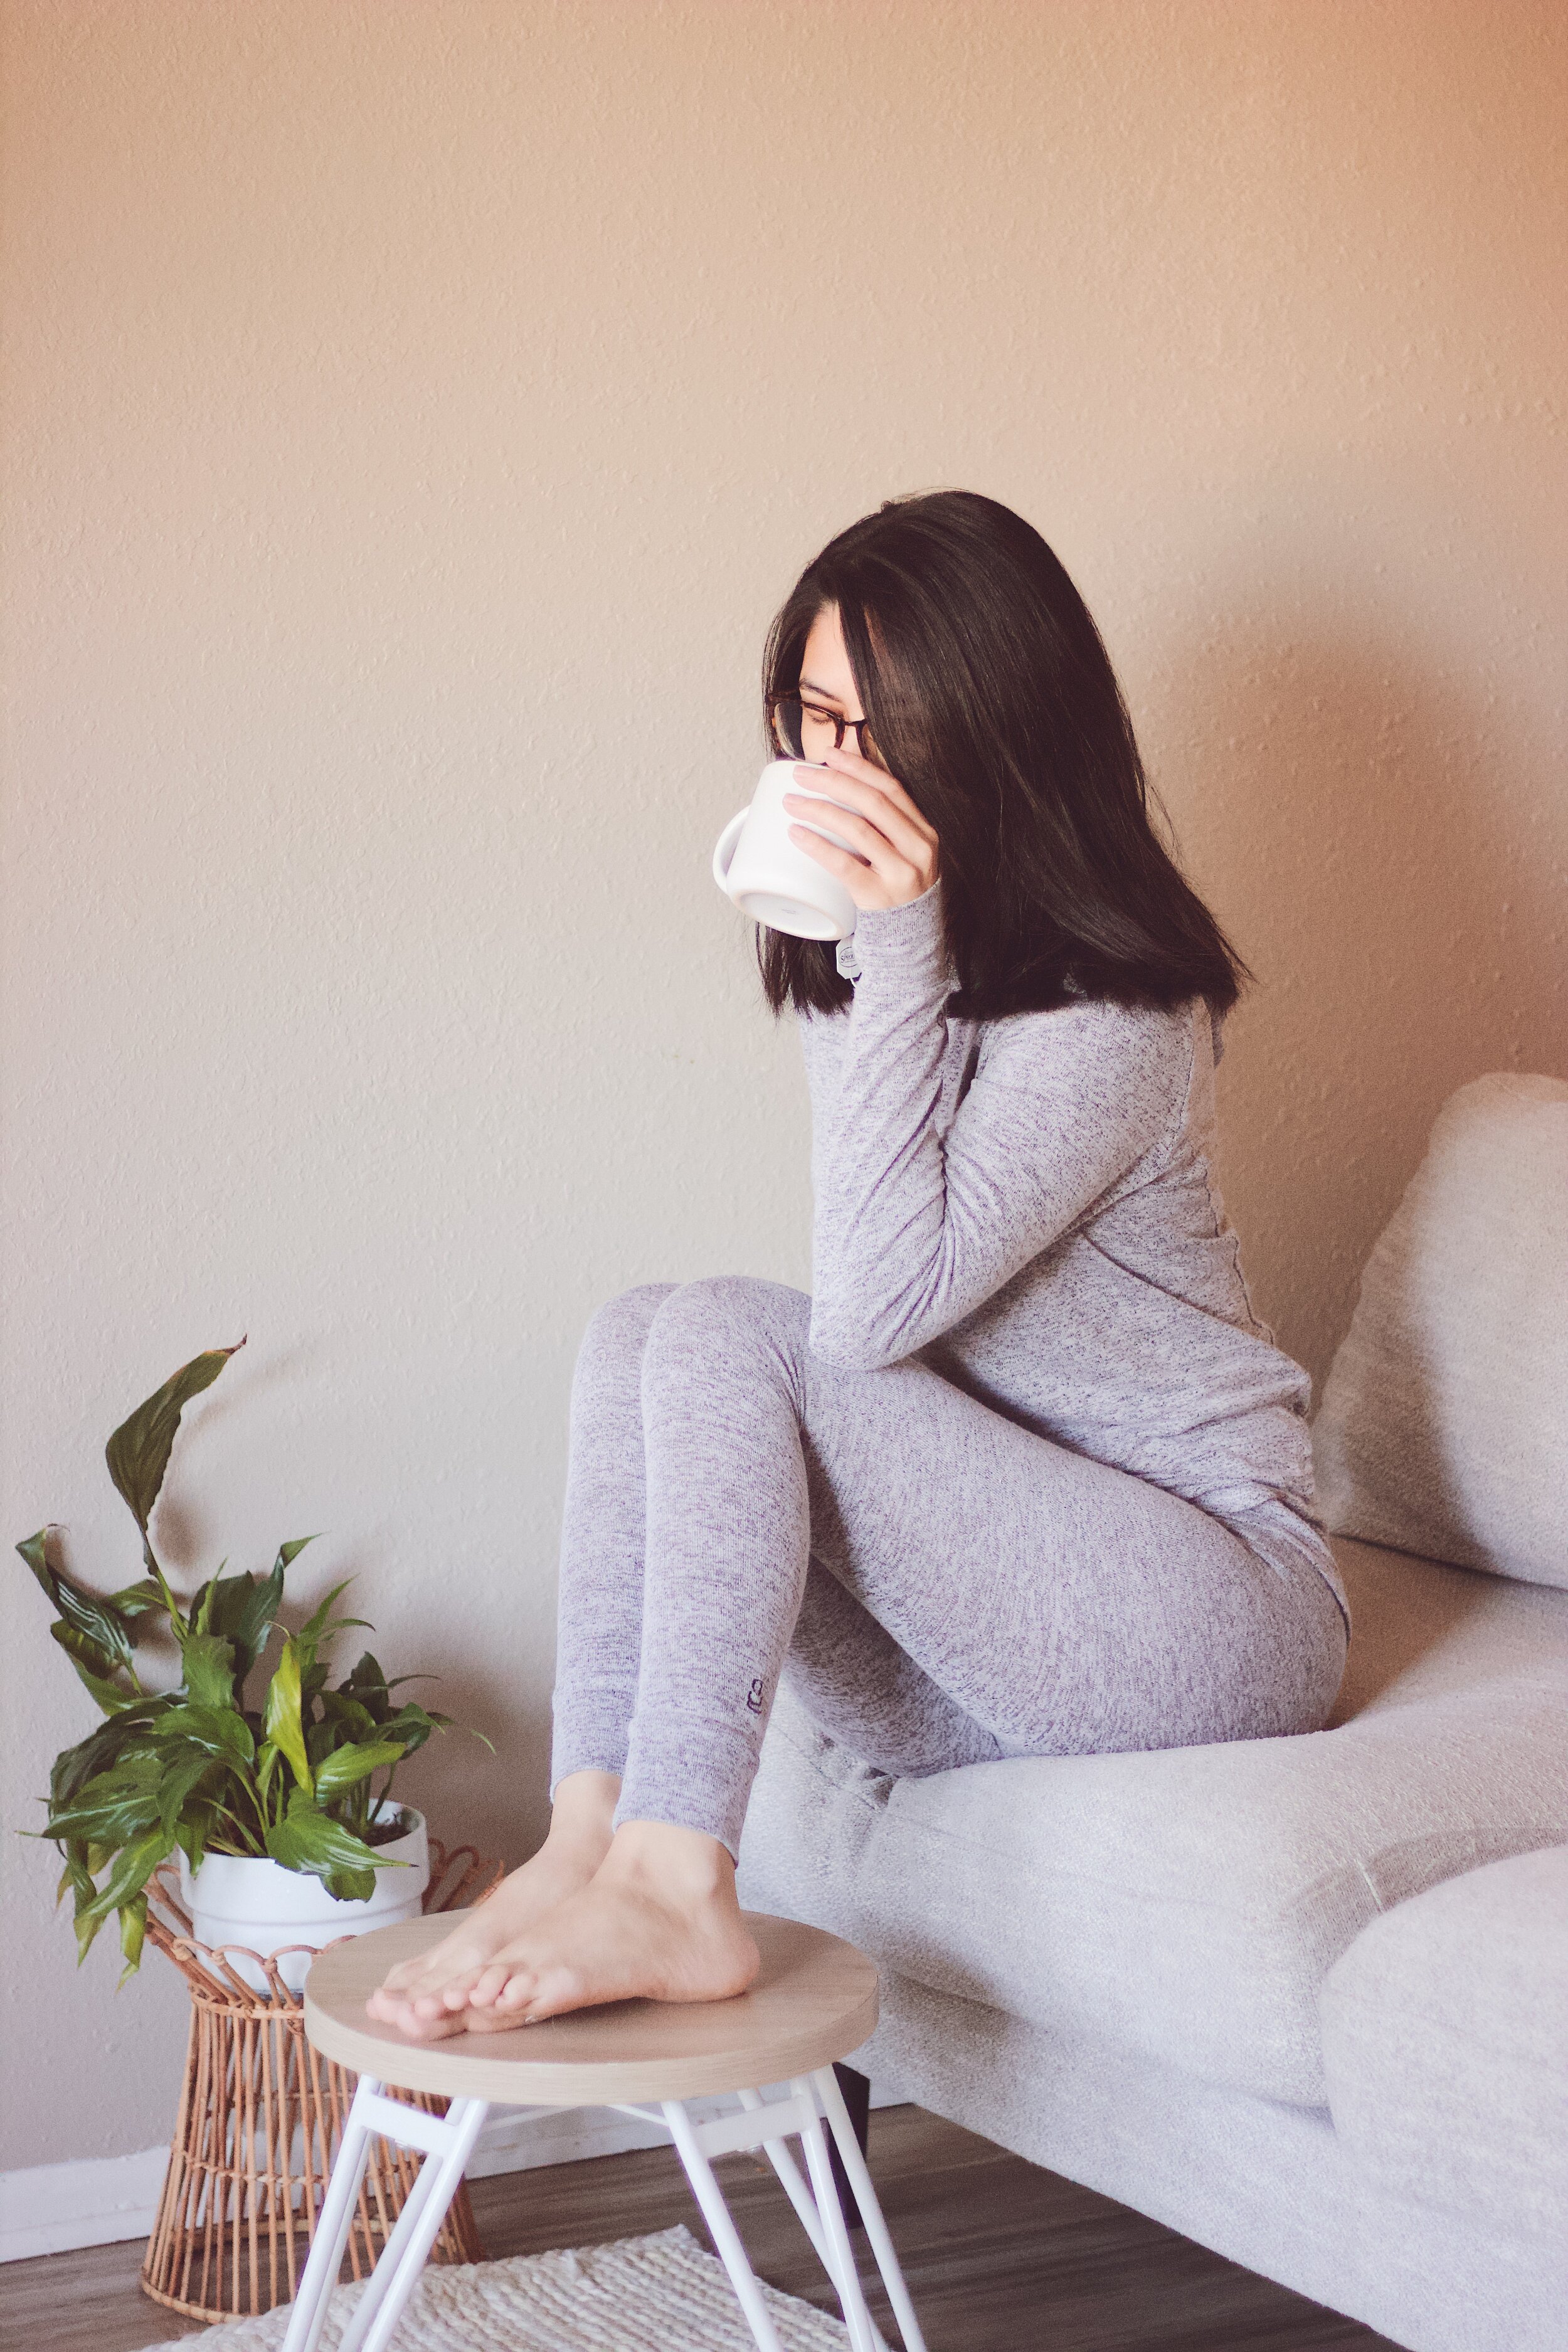 Cozy + Quiet Mornings | #LiveInLayers with Cuddl Duds at Kohl’s to stay warm and cozy this season | hellolovelyliving.com